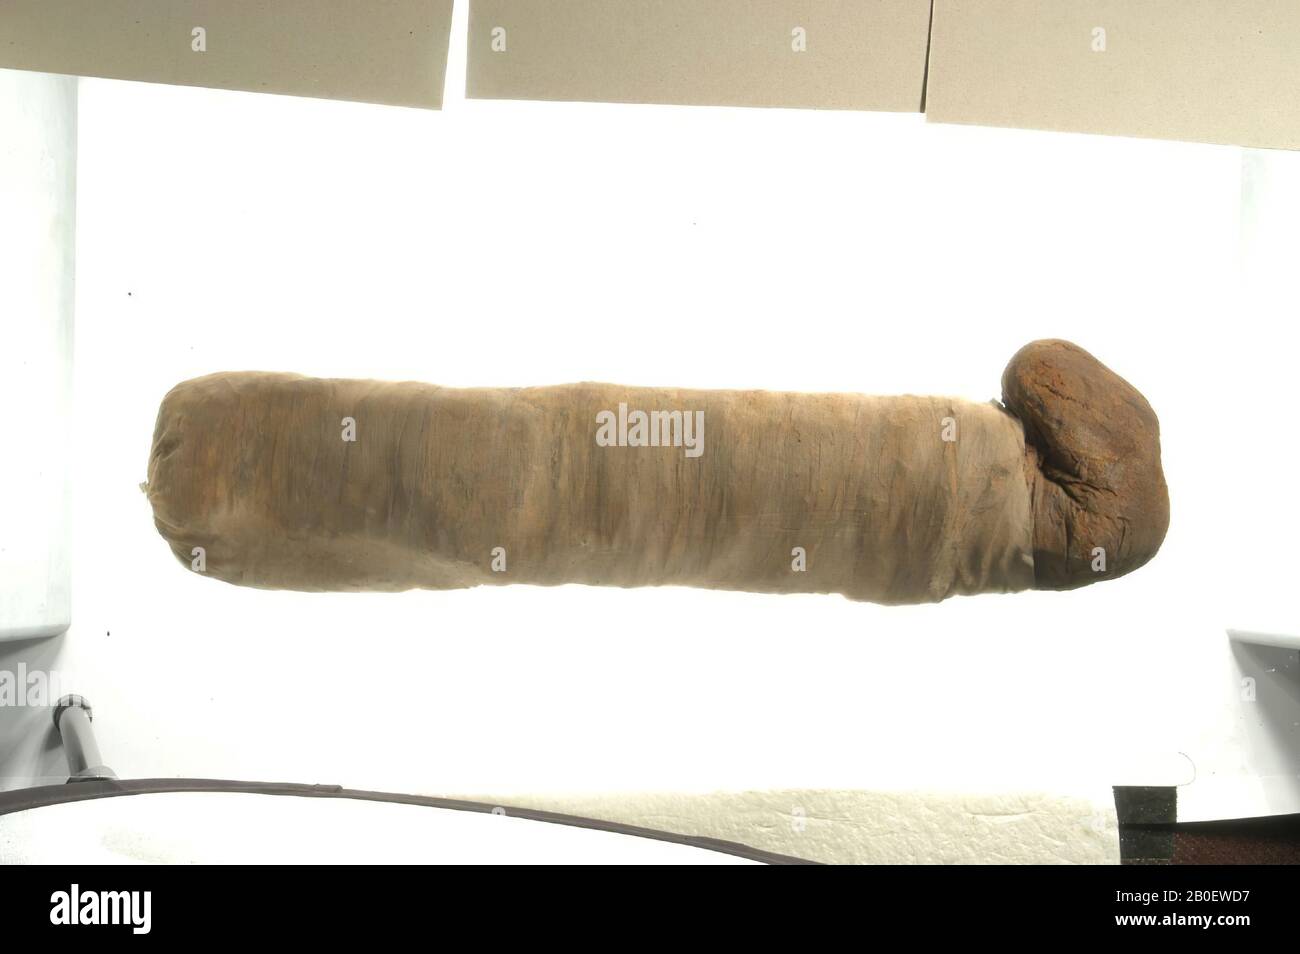 cat, Cat mummy with flattened body and protruding head. The animal's head is wrapped in irregular bandages from a larger sheet and probably fixed with glue. These consist of dark brown linen (warp-faced tabby weave, about 13 x 32 threads Stock Photo